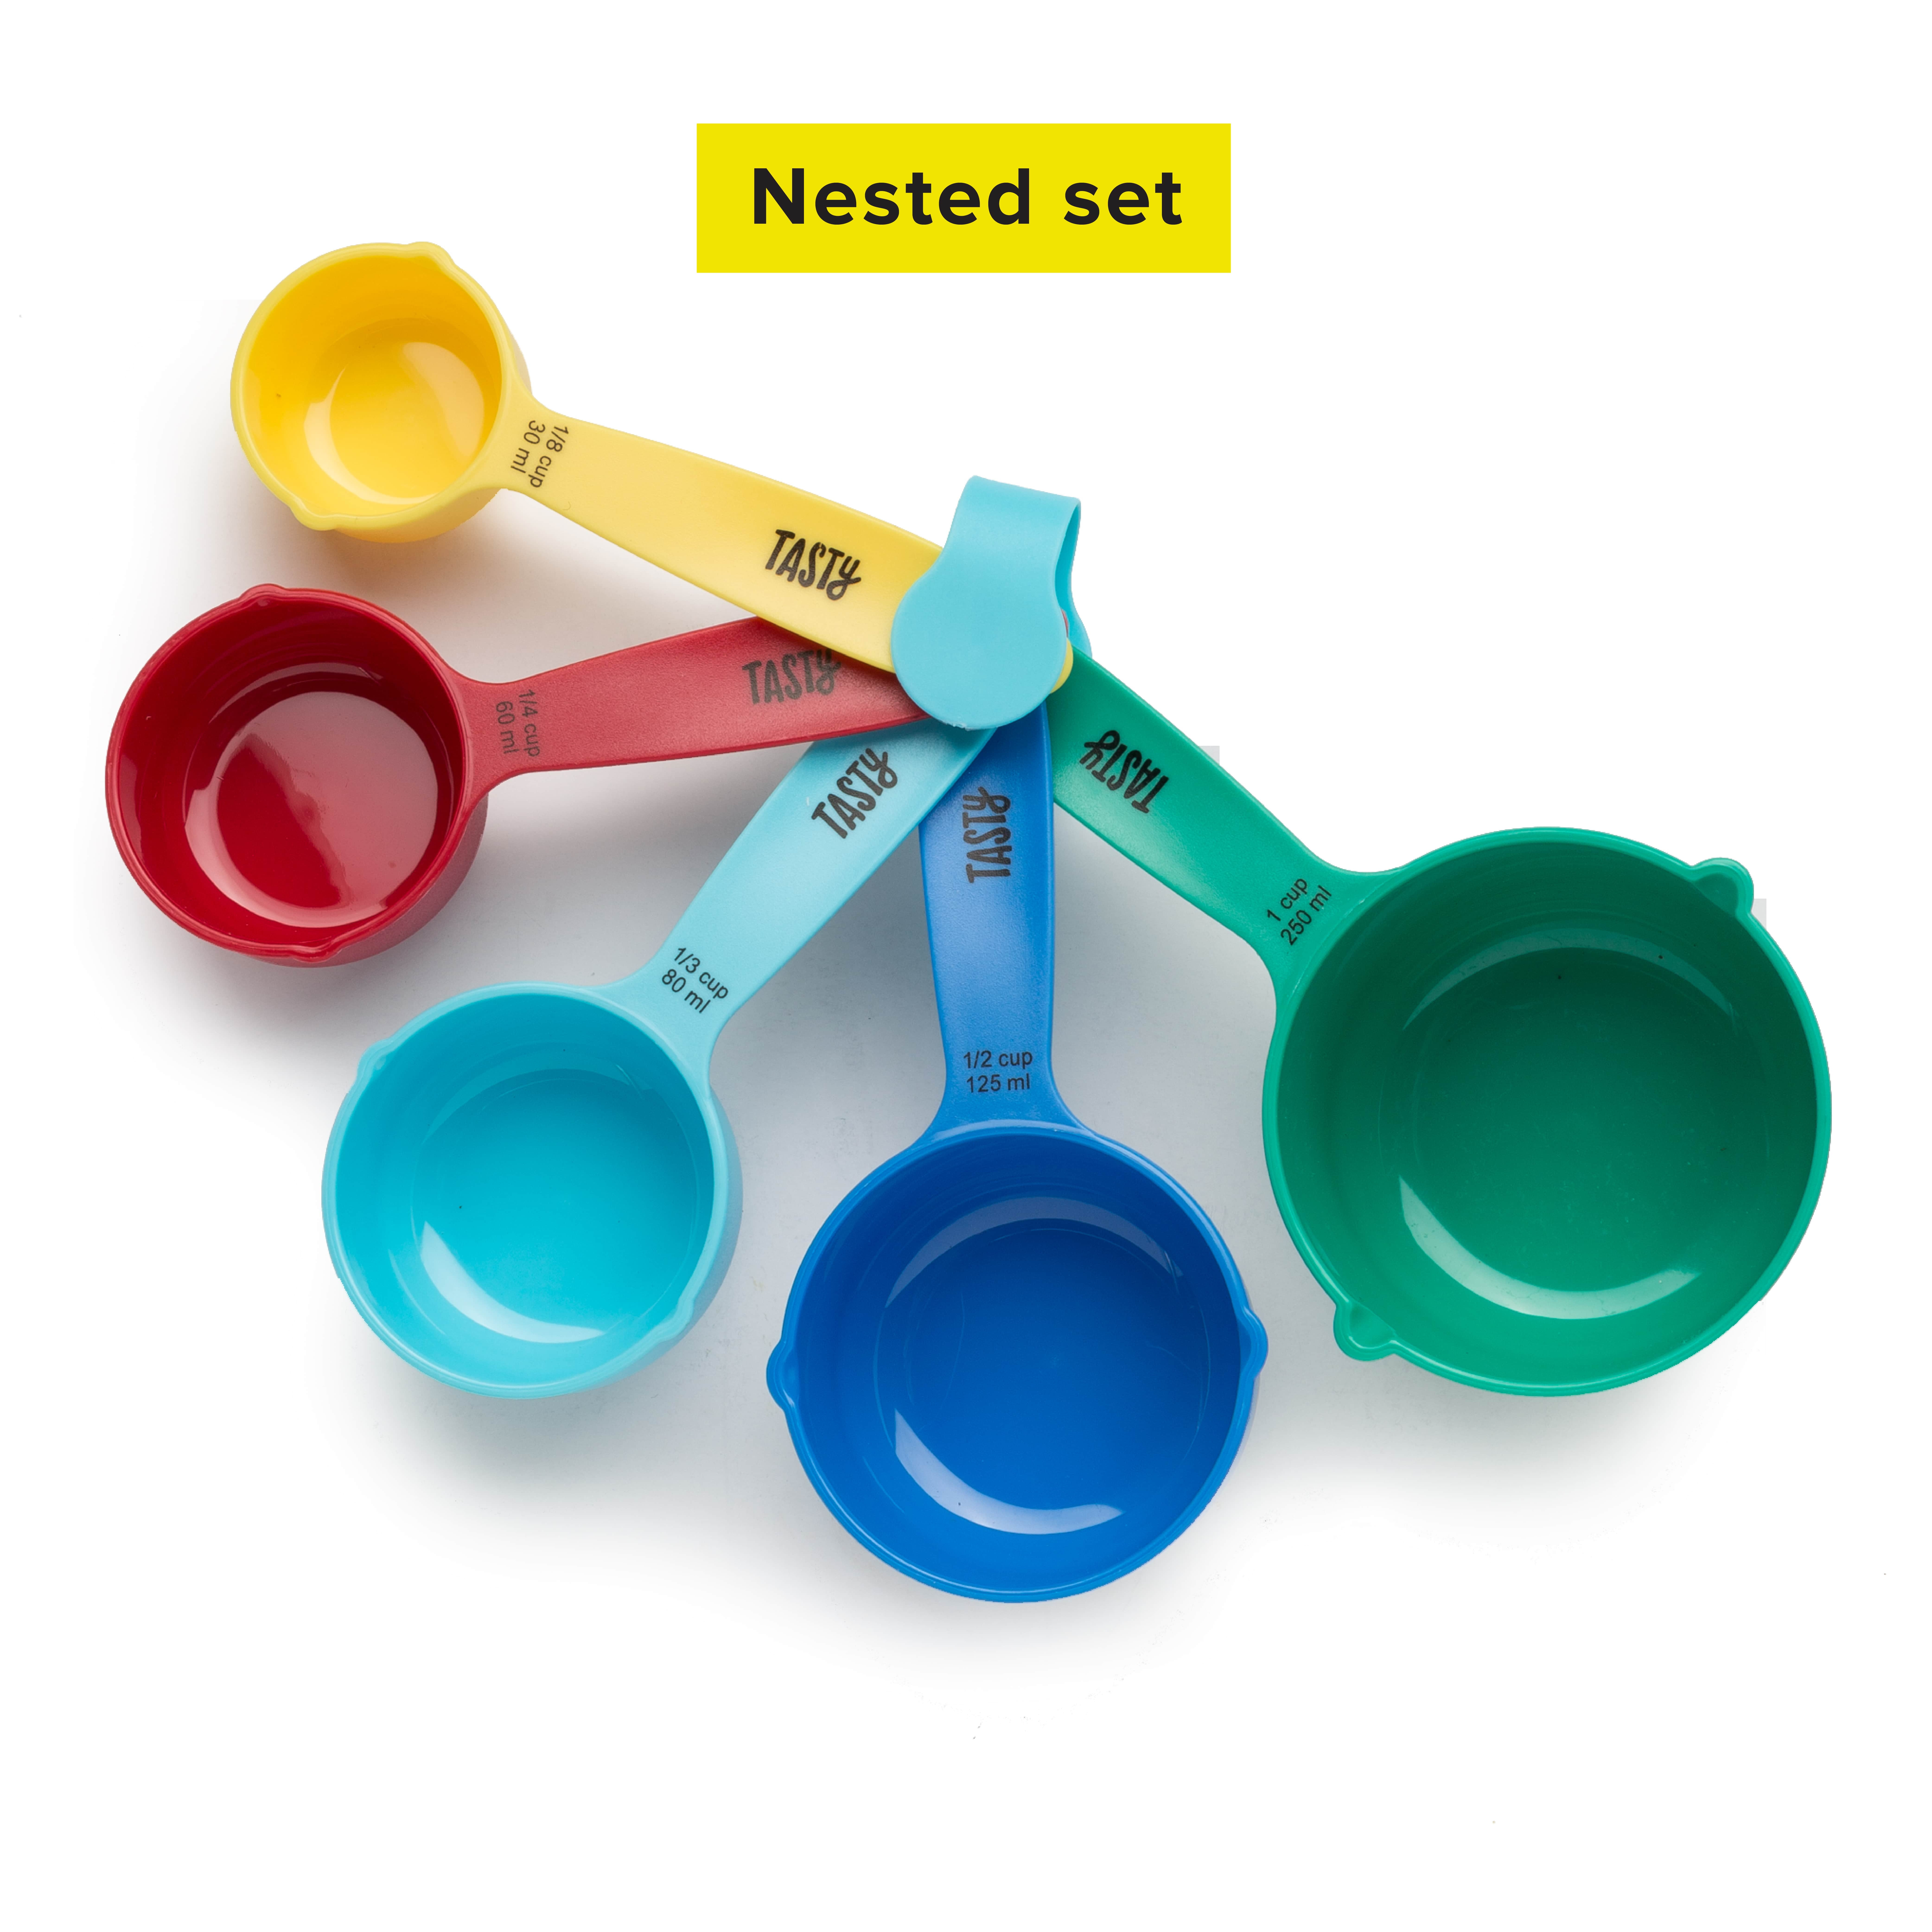 IFFMYJB Measuring Cups and Spoons Set 15, Plastic Mesuring Cups Spoons, 7  Plastic Color Measuring Cups 7 Plastic Measuring Spoons with leveler, Cute